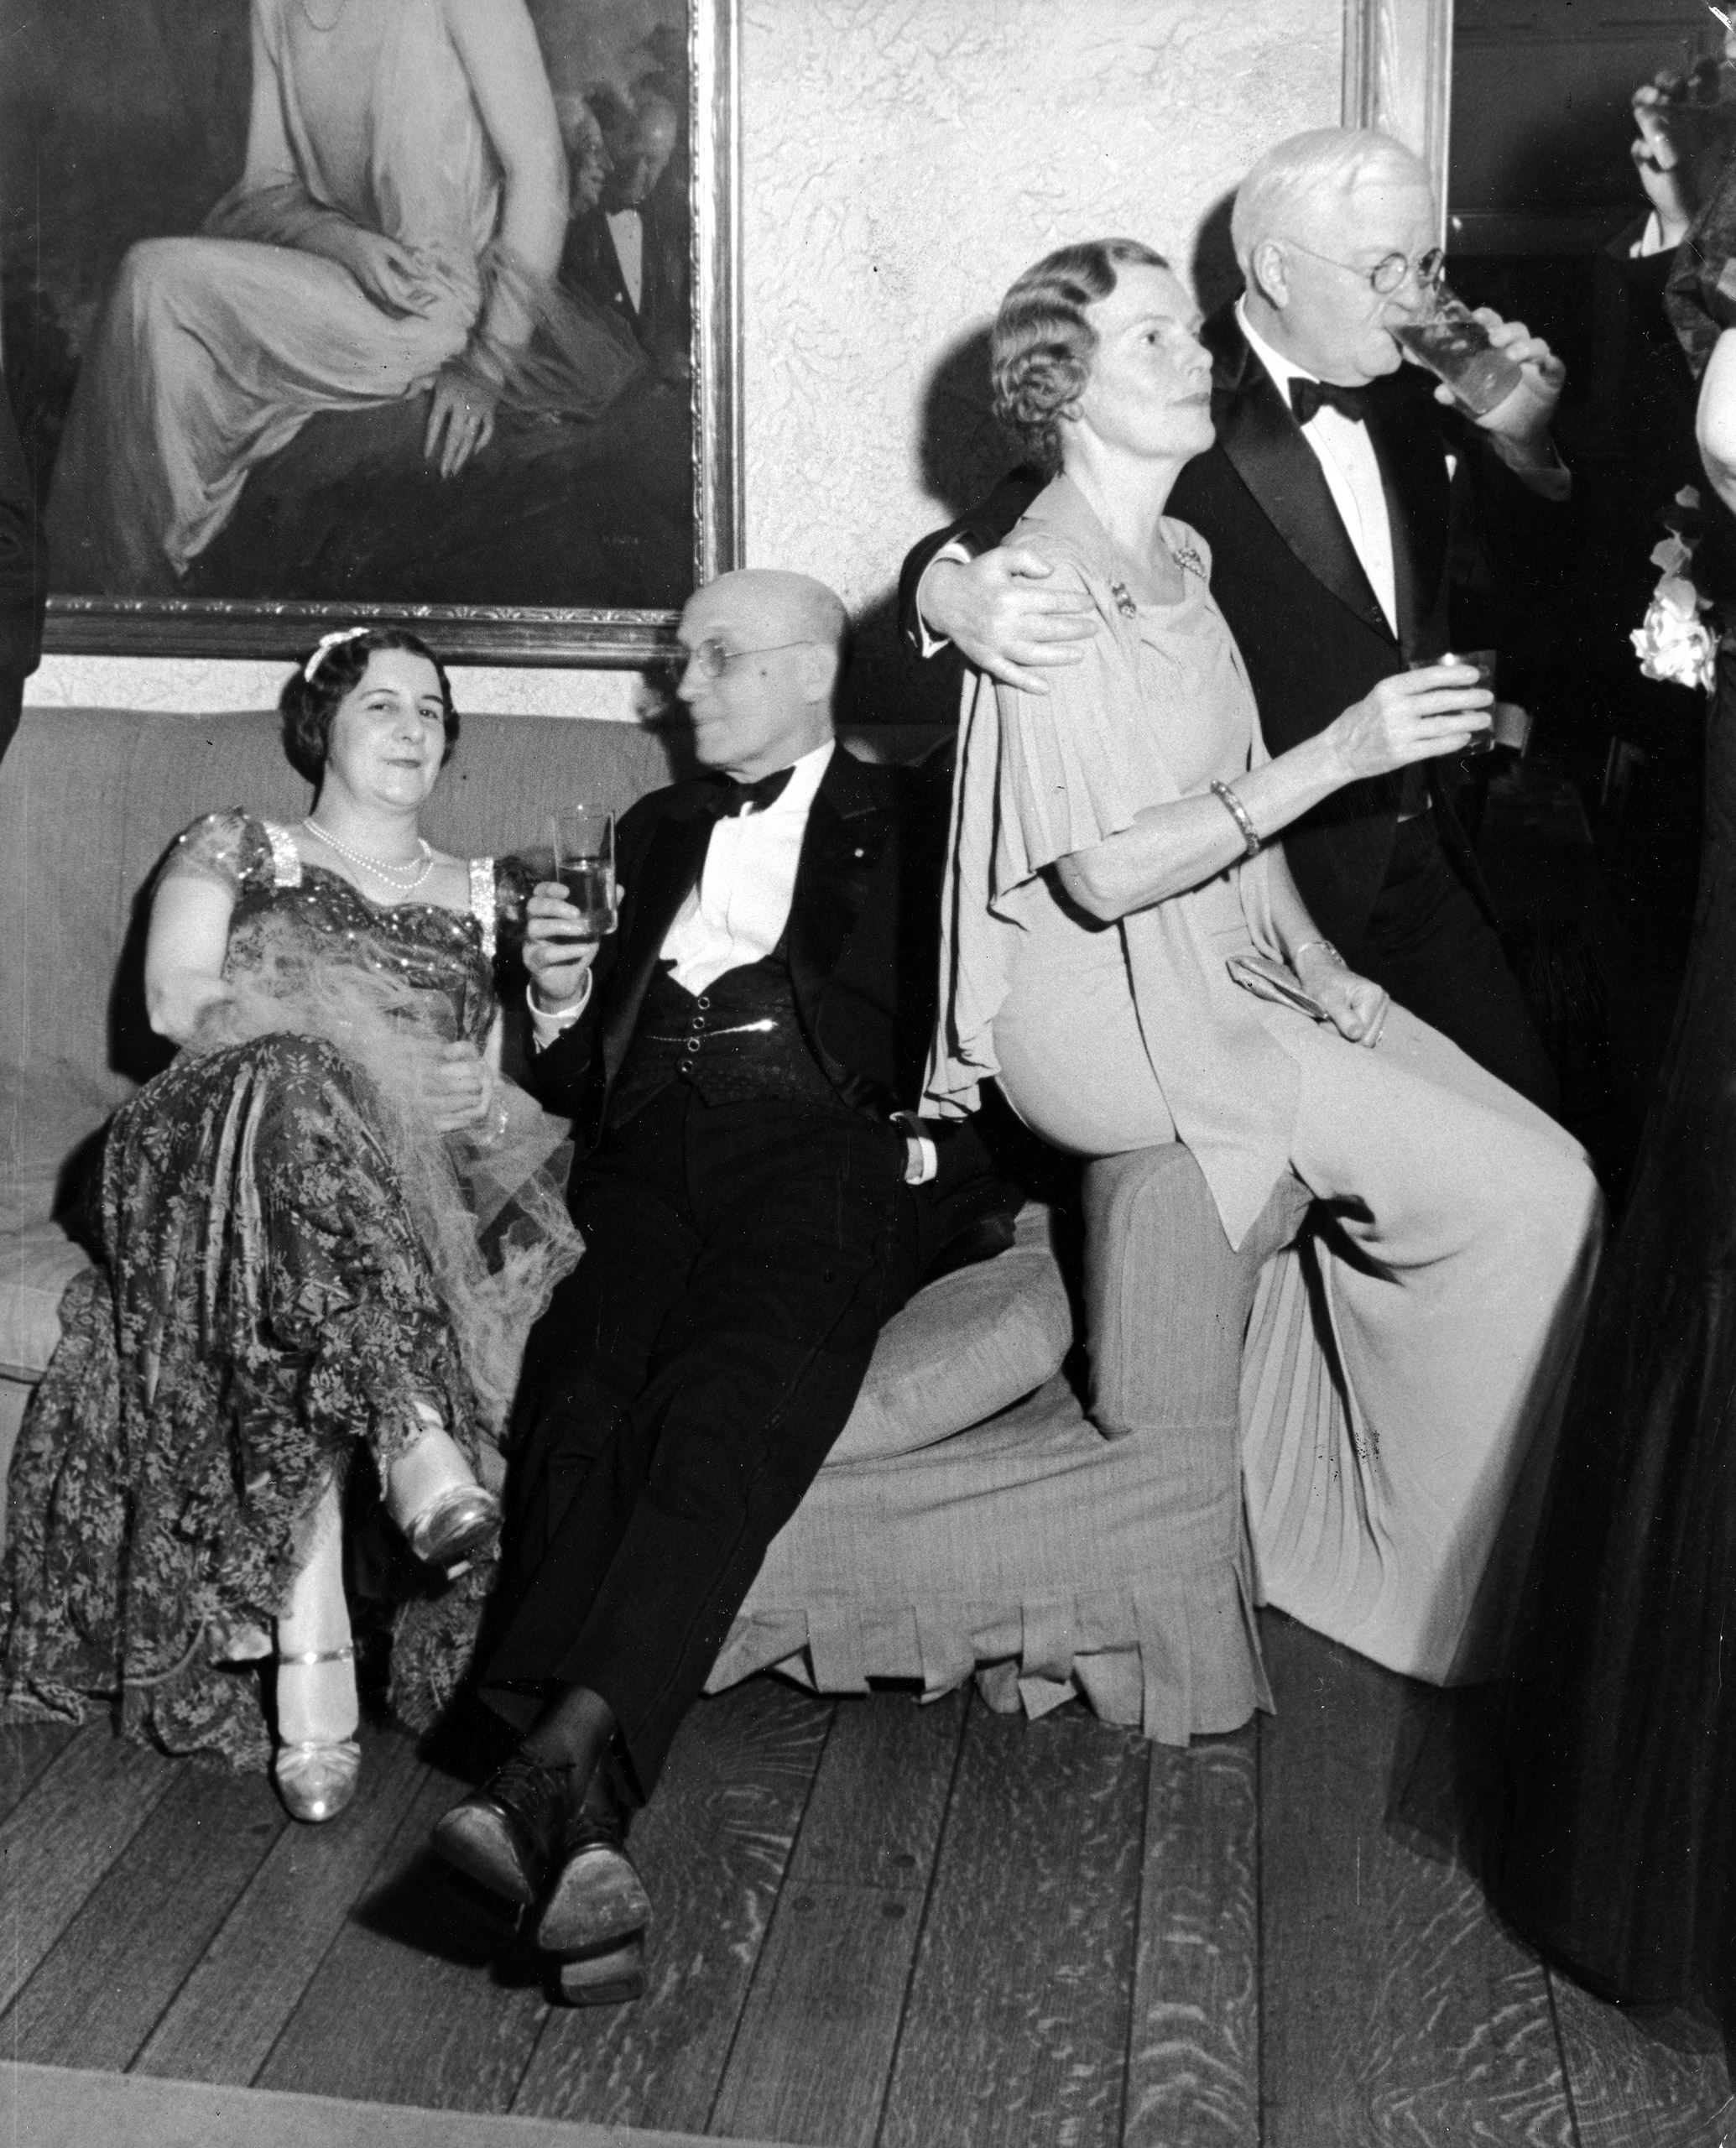 Changing into evening dress, many Van Winkle guests proceeded to Mrs. Henry J. Powell's buffet supper. Above, left to right, Mrs. Rowan Morrison, Gustave Breux, Mrs. William C. Hall and Judge Arthur Peter. The tall glasses contain not mint juleps but Bourbon and soda.